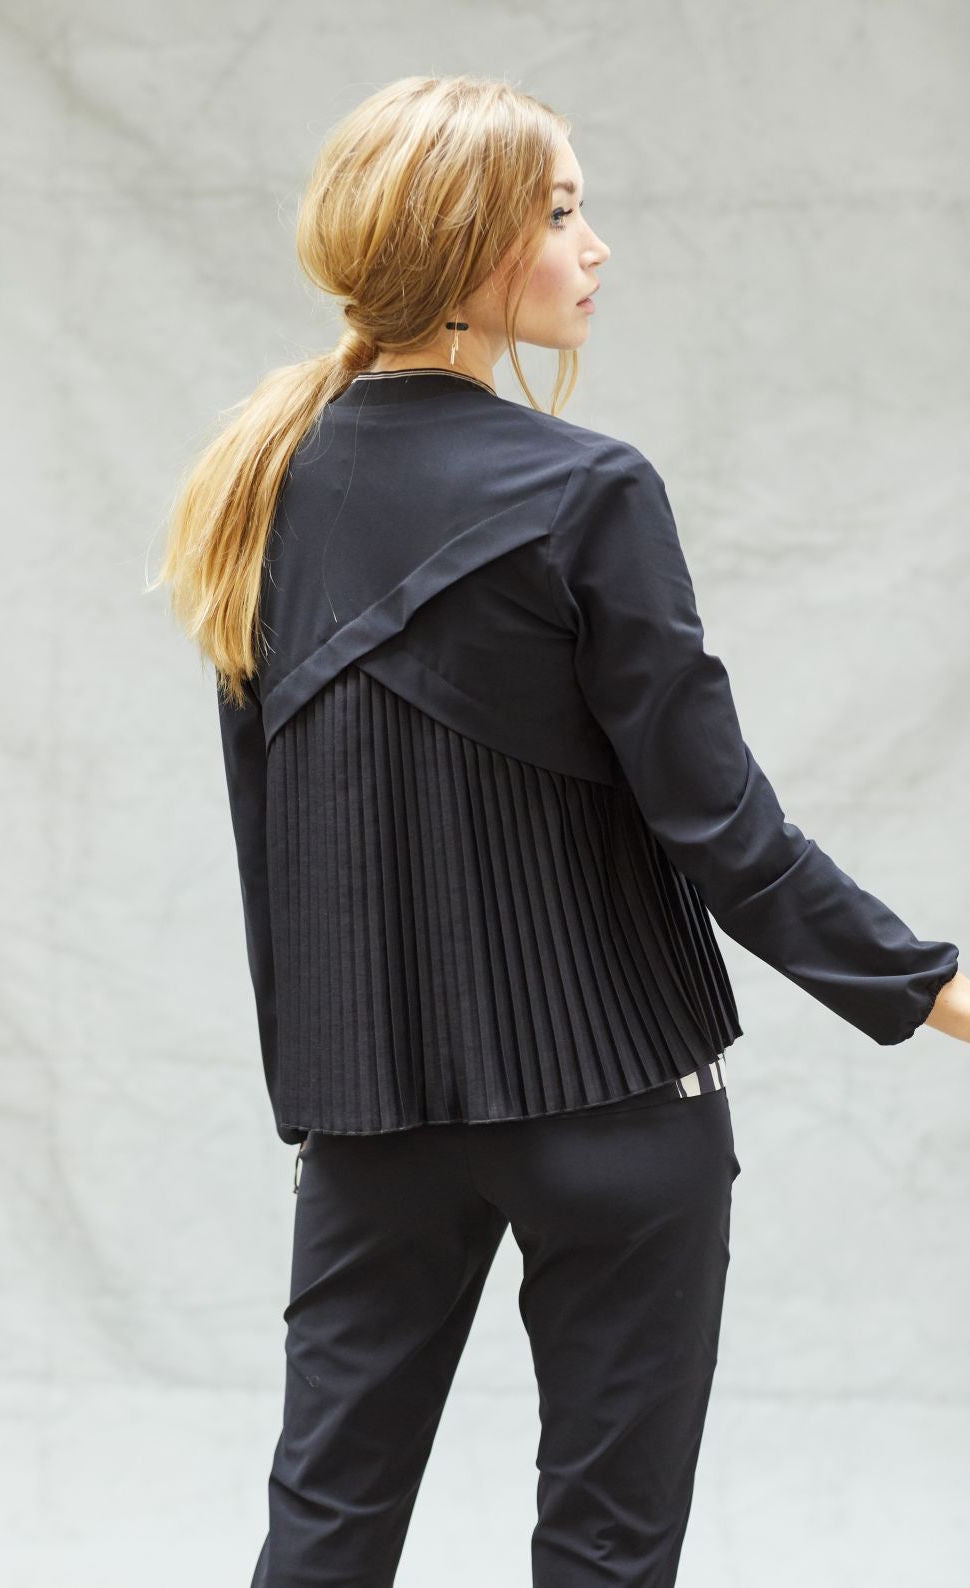 Back top half view of a woman wearing black pants and the indies black fute jacket. This jacket has pleats on the back with a criss-crossing of fabric on the upper back.